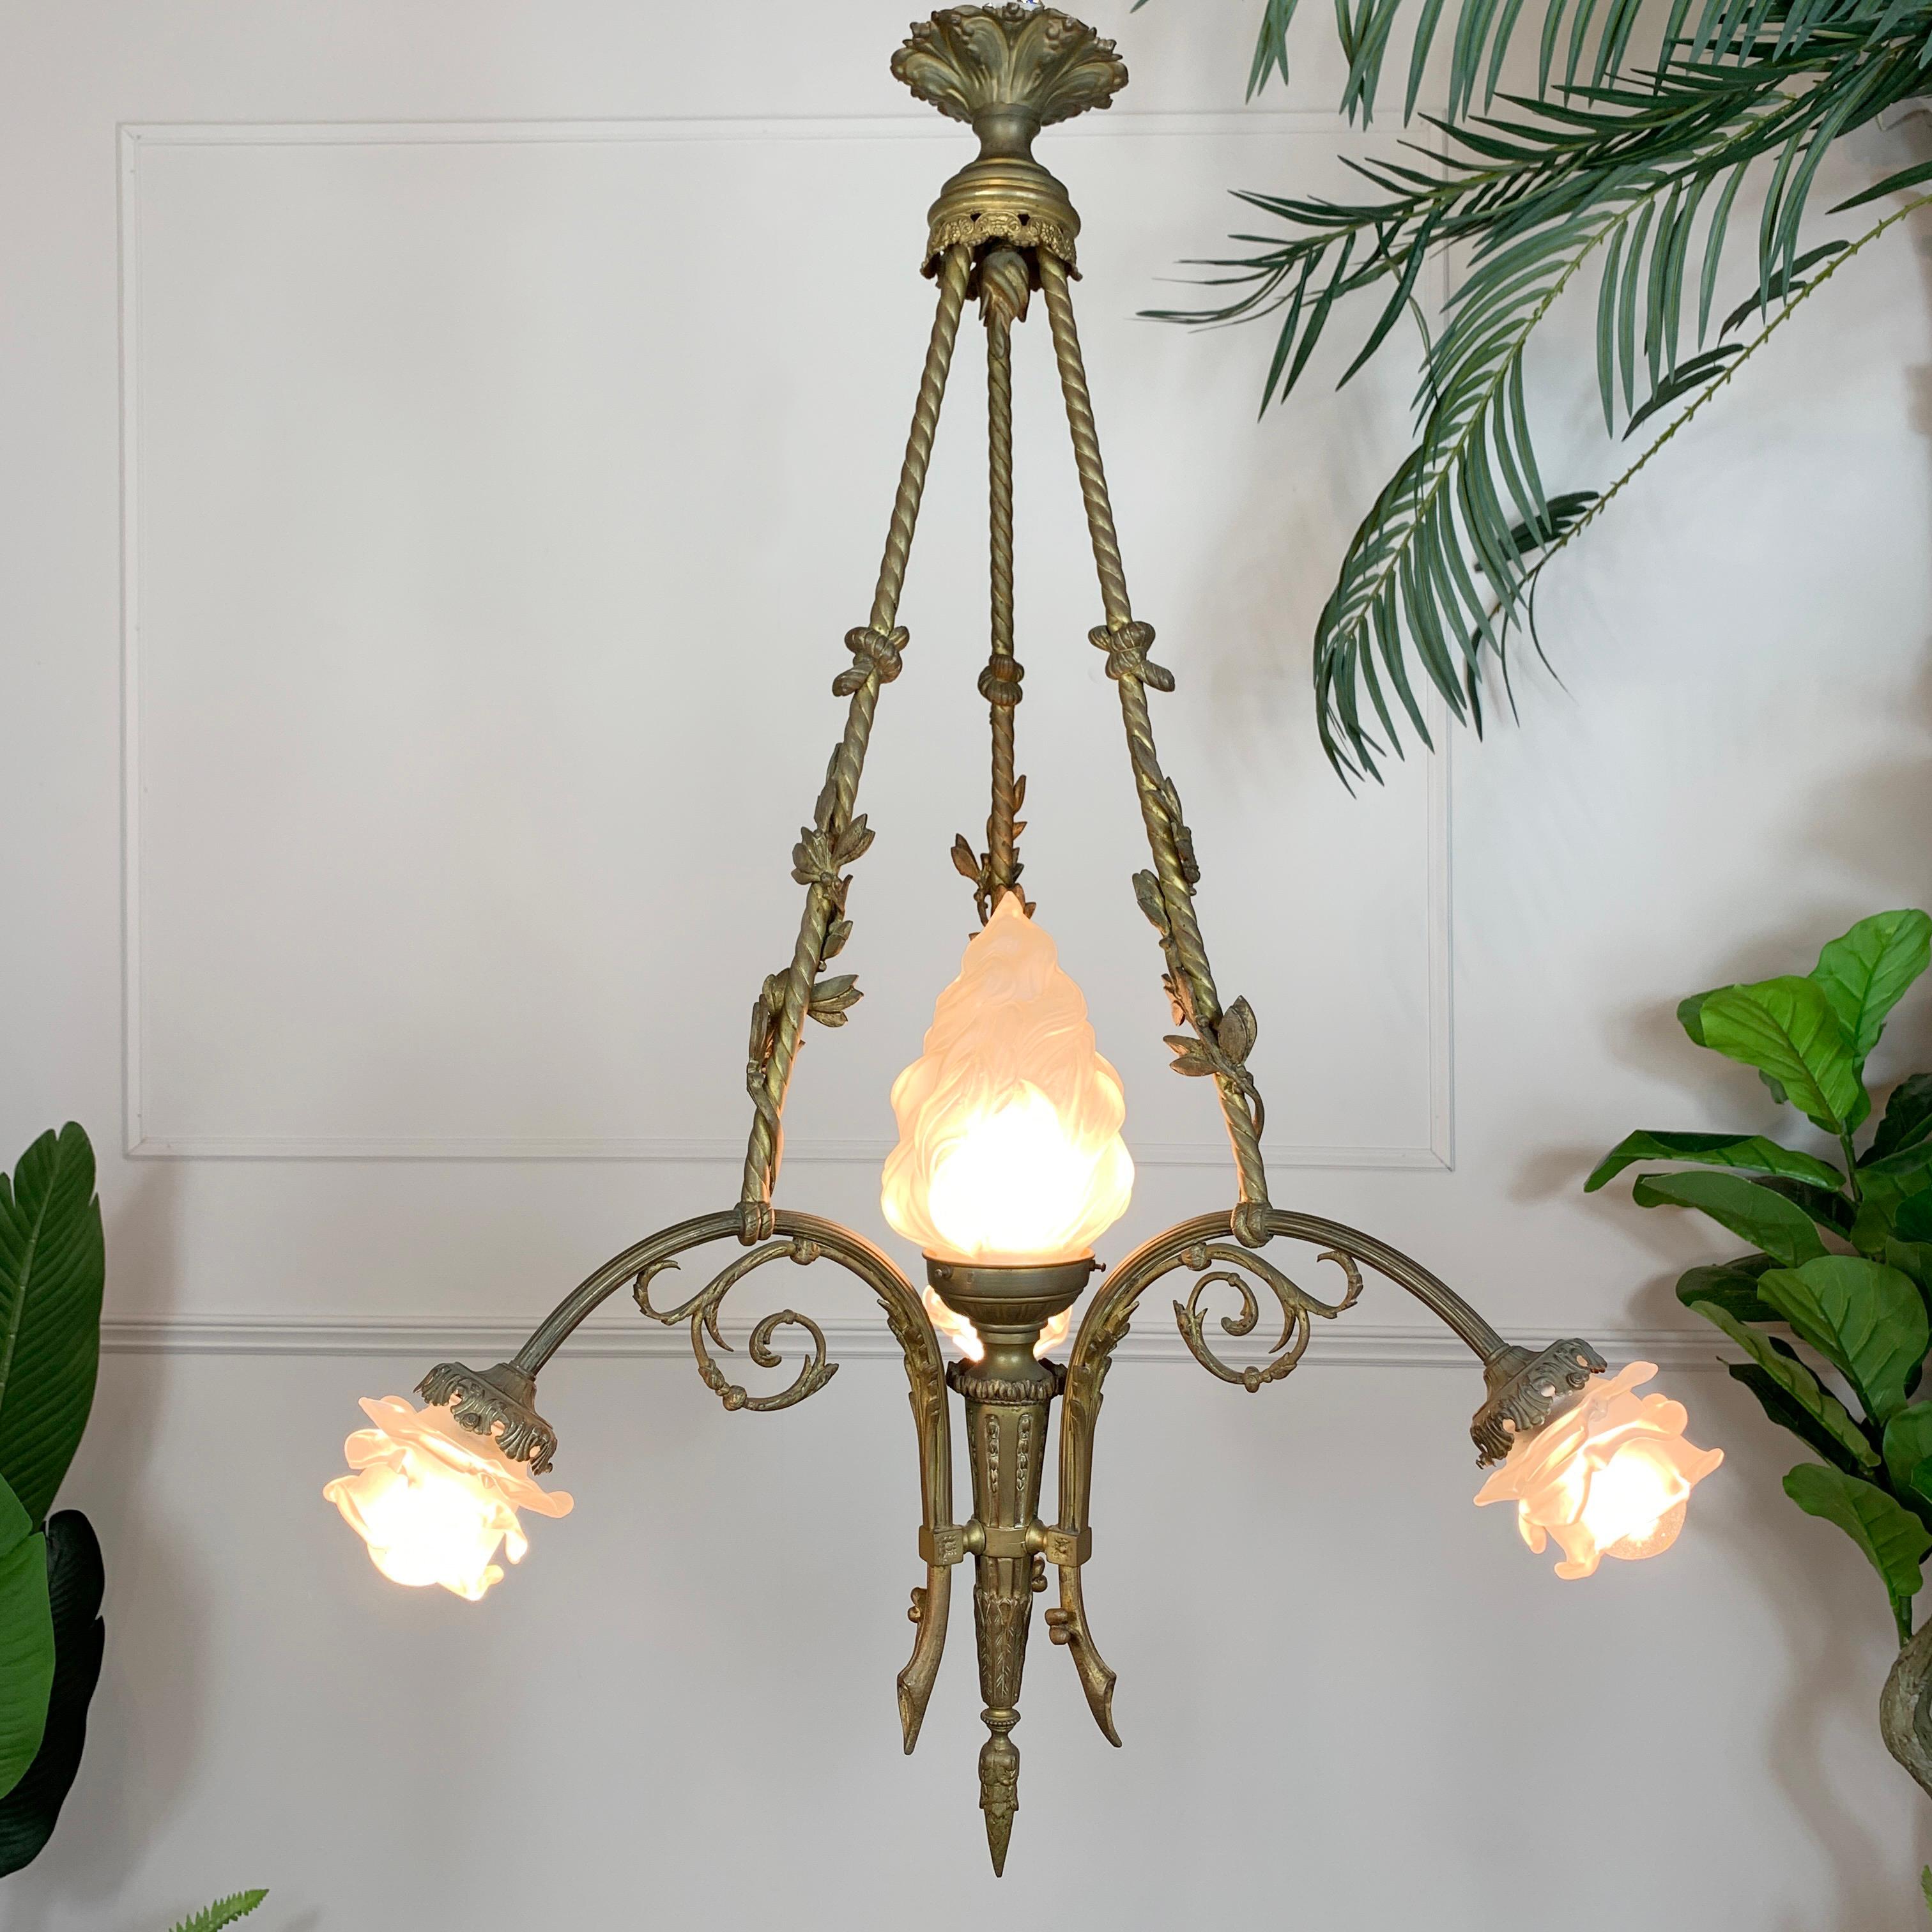 An exceptional Art Nouveau chandelier, dating to circa 1905, the bronze rope twist chandelier arms are adorned with smaller twists of rope and leaf decorative flourishes. The three branches of the chandelier each bears a cut glass shade in the form